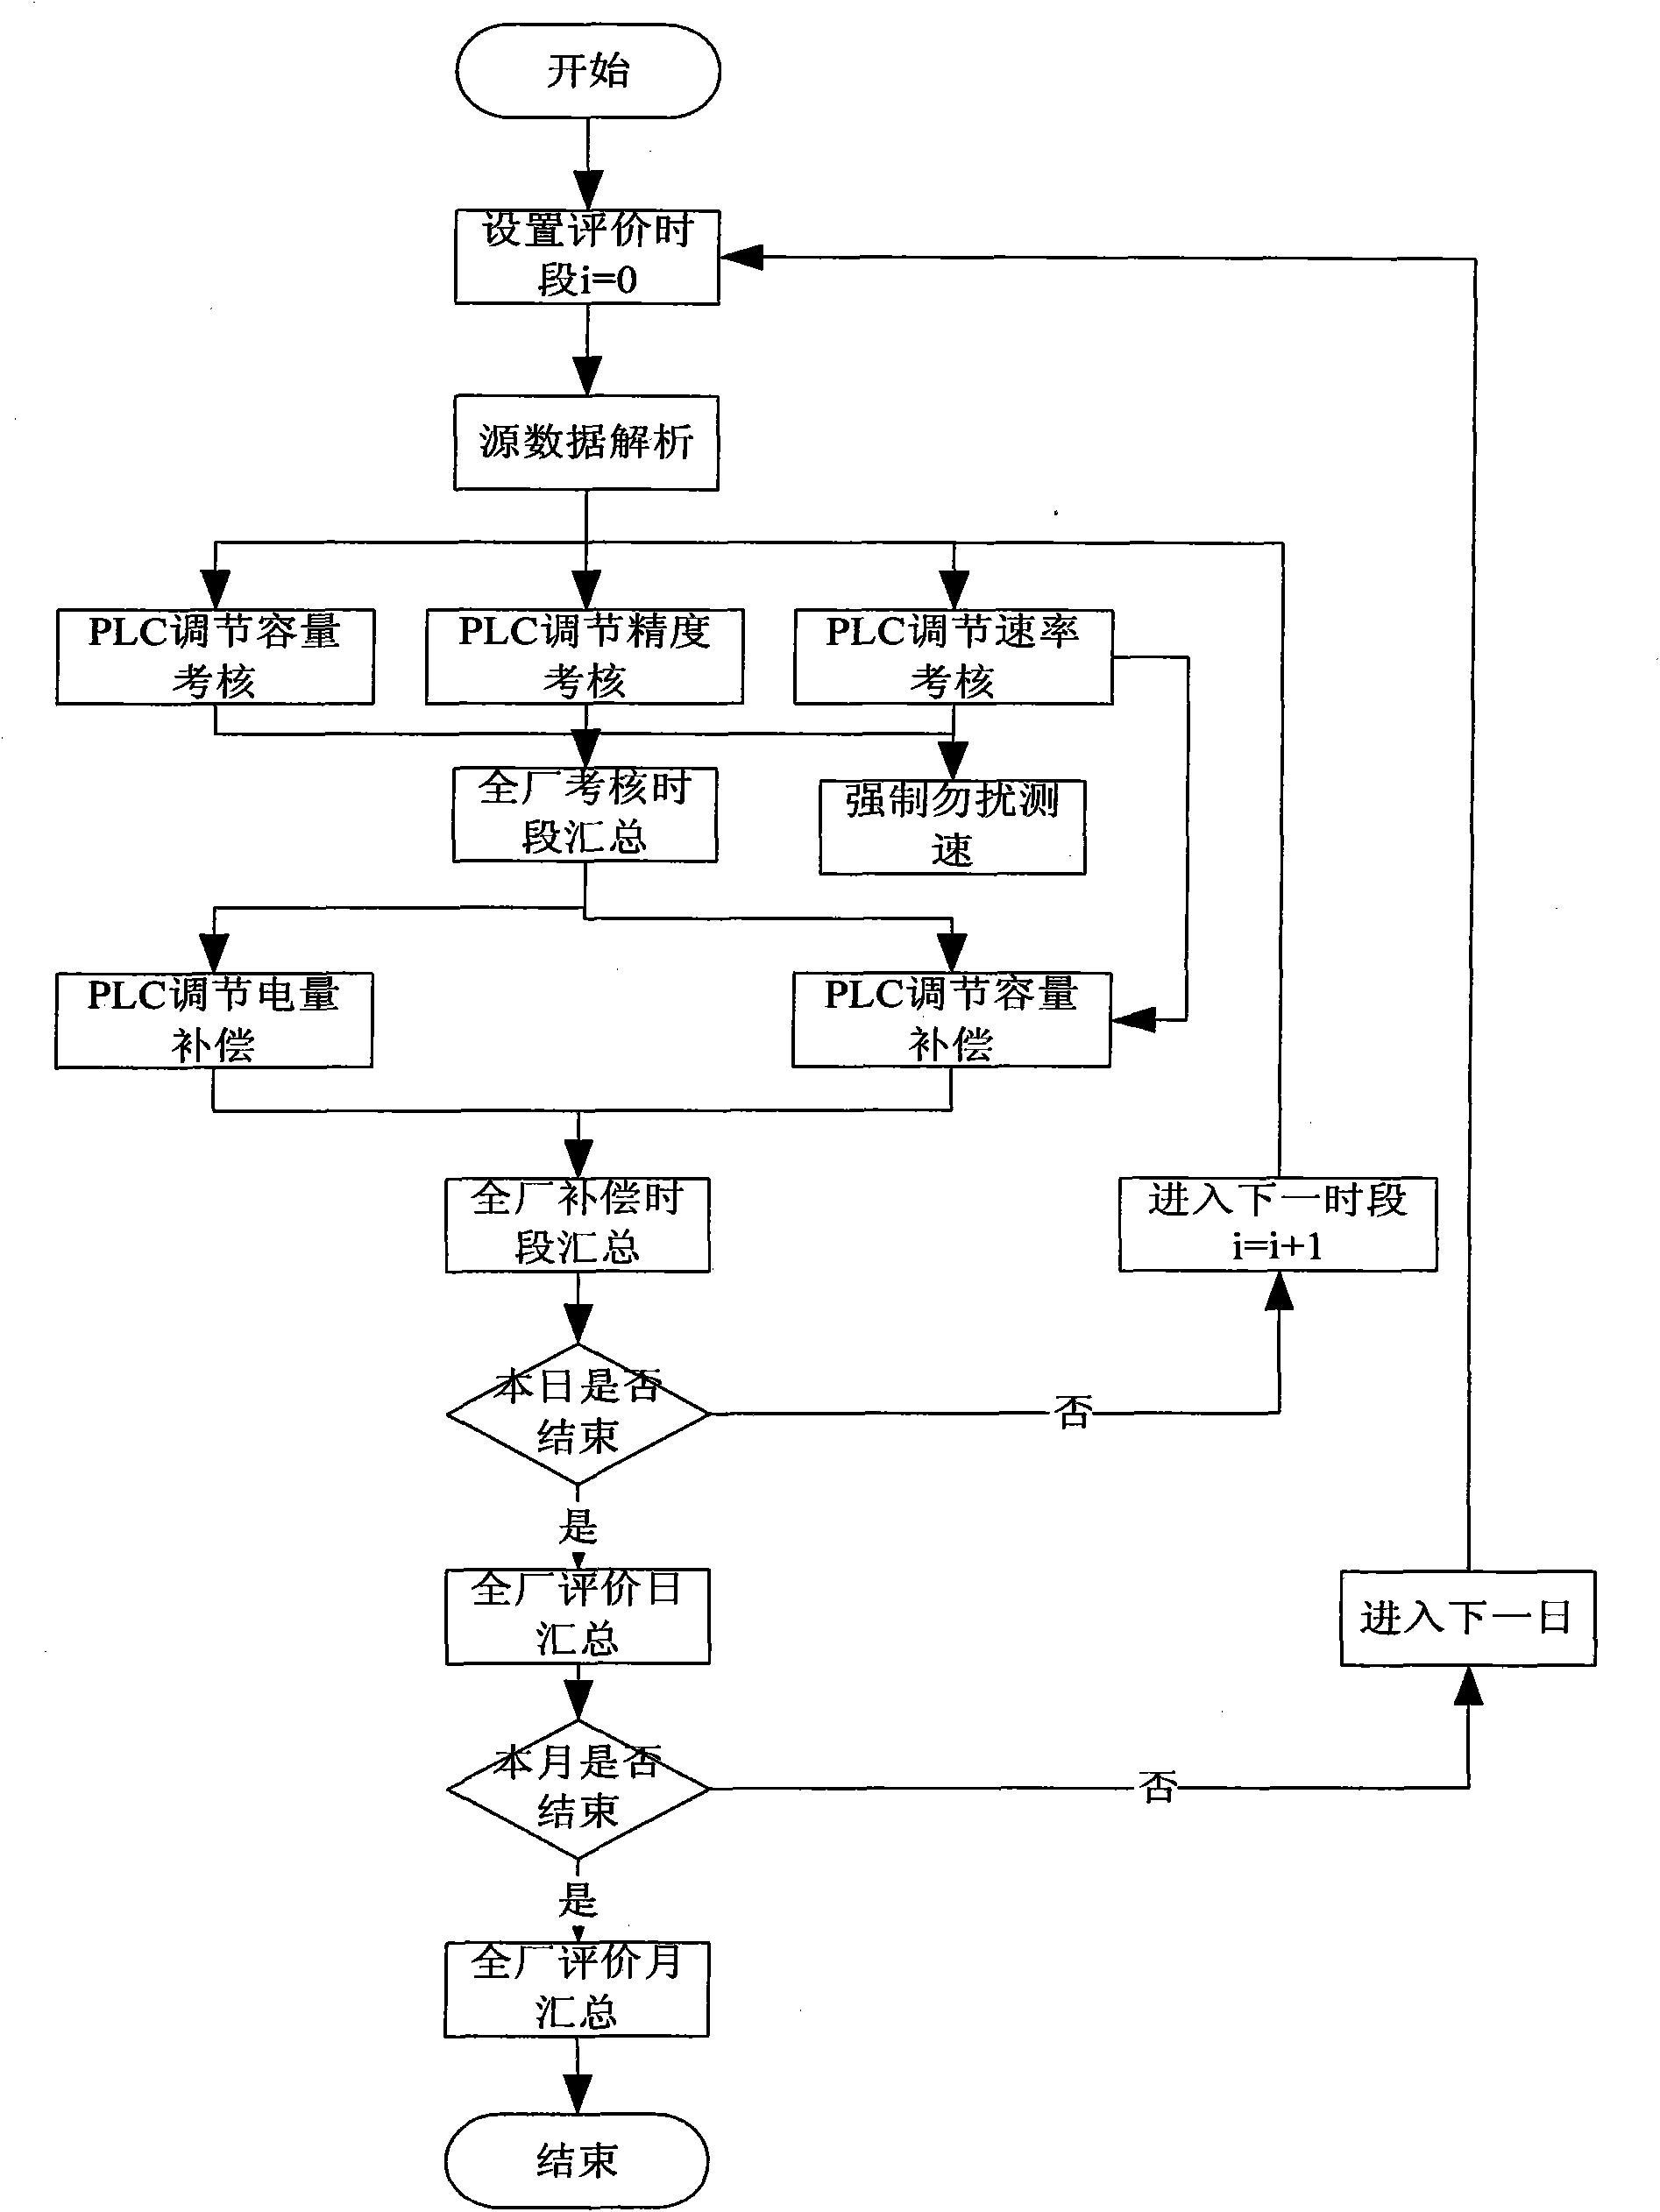 Method for evaluating and optimizing auto generation control effect of large power network grid-connected power plant